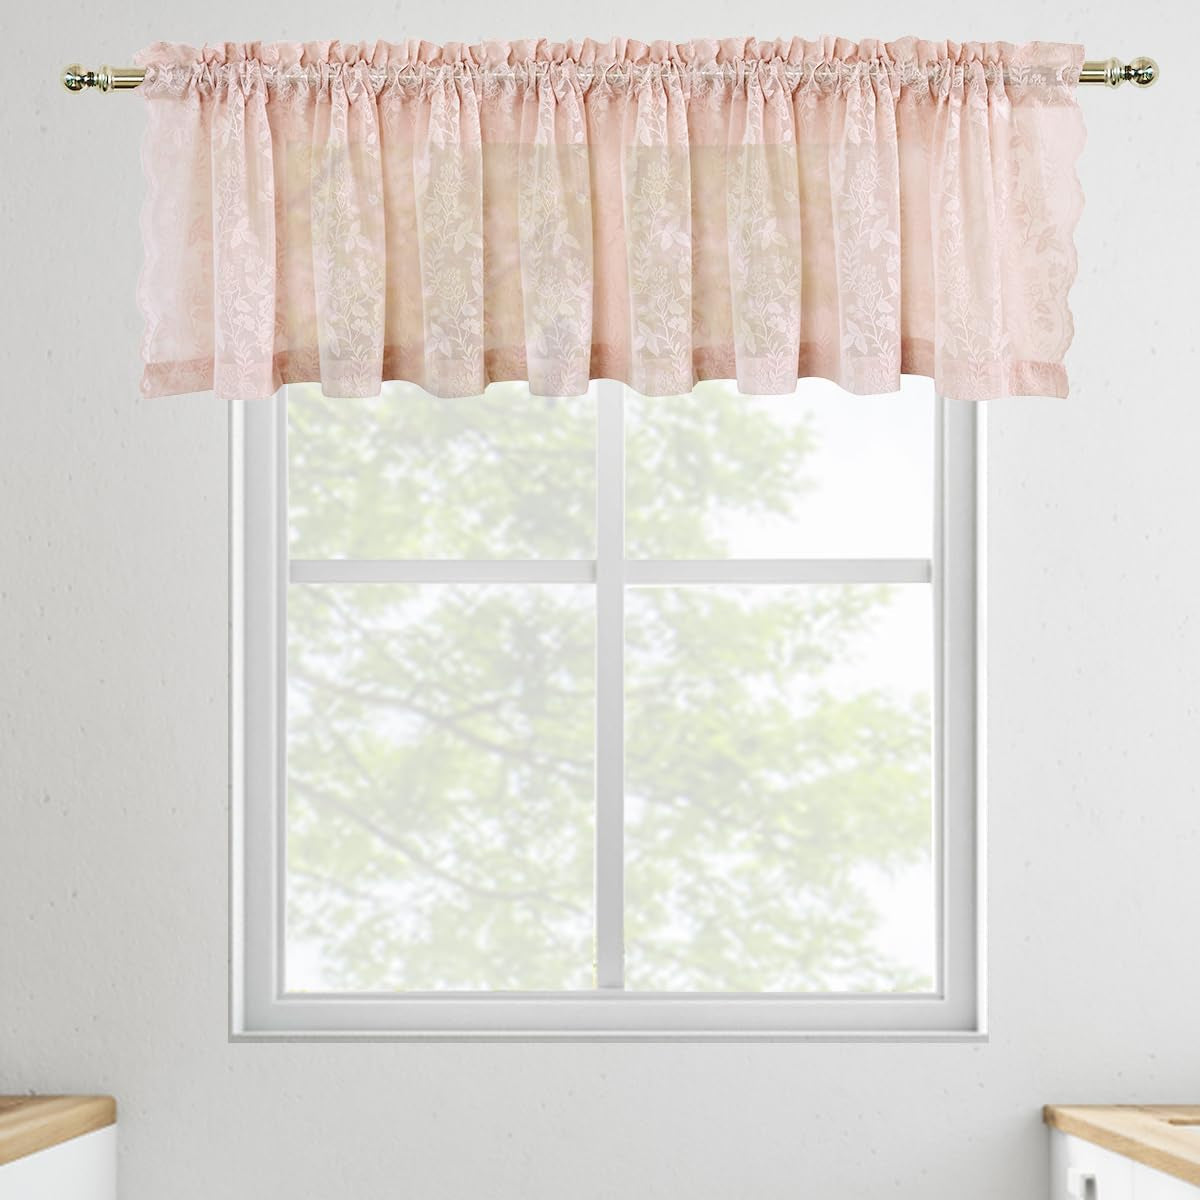 FINECITY Lace Curtains Country Rustic Floral Sheer Curtains for Living Room 72 Inch Length Drapes Vintage Floral Pattern Farmhouse Privacy Light Filtering Sheer Curtain 2 Panels, 52 X 72 Inch, Grey  Keyu Textile Blush Pink W52 X L18 Inch 